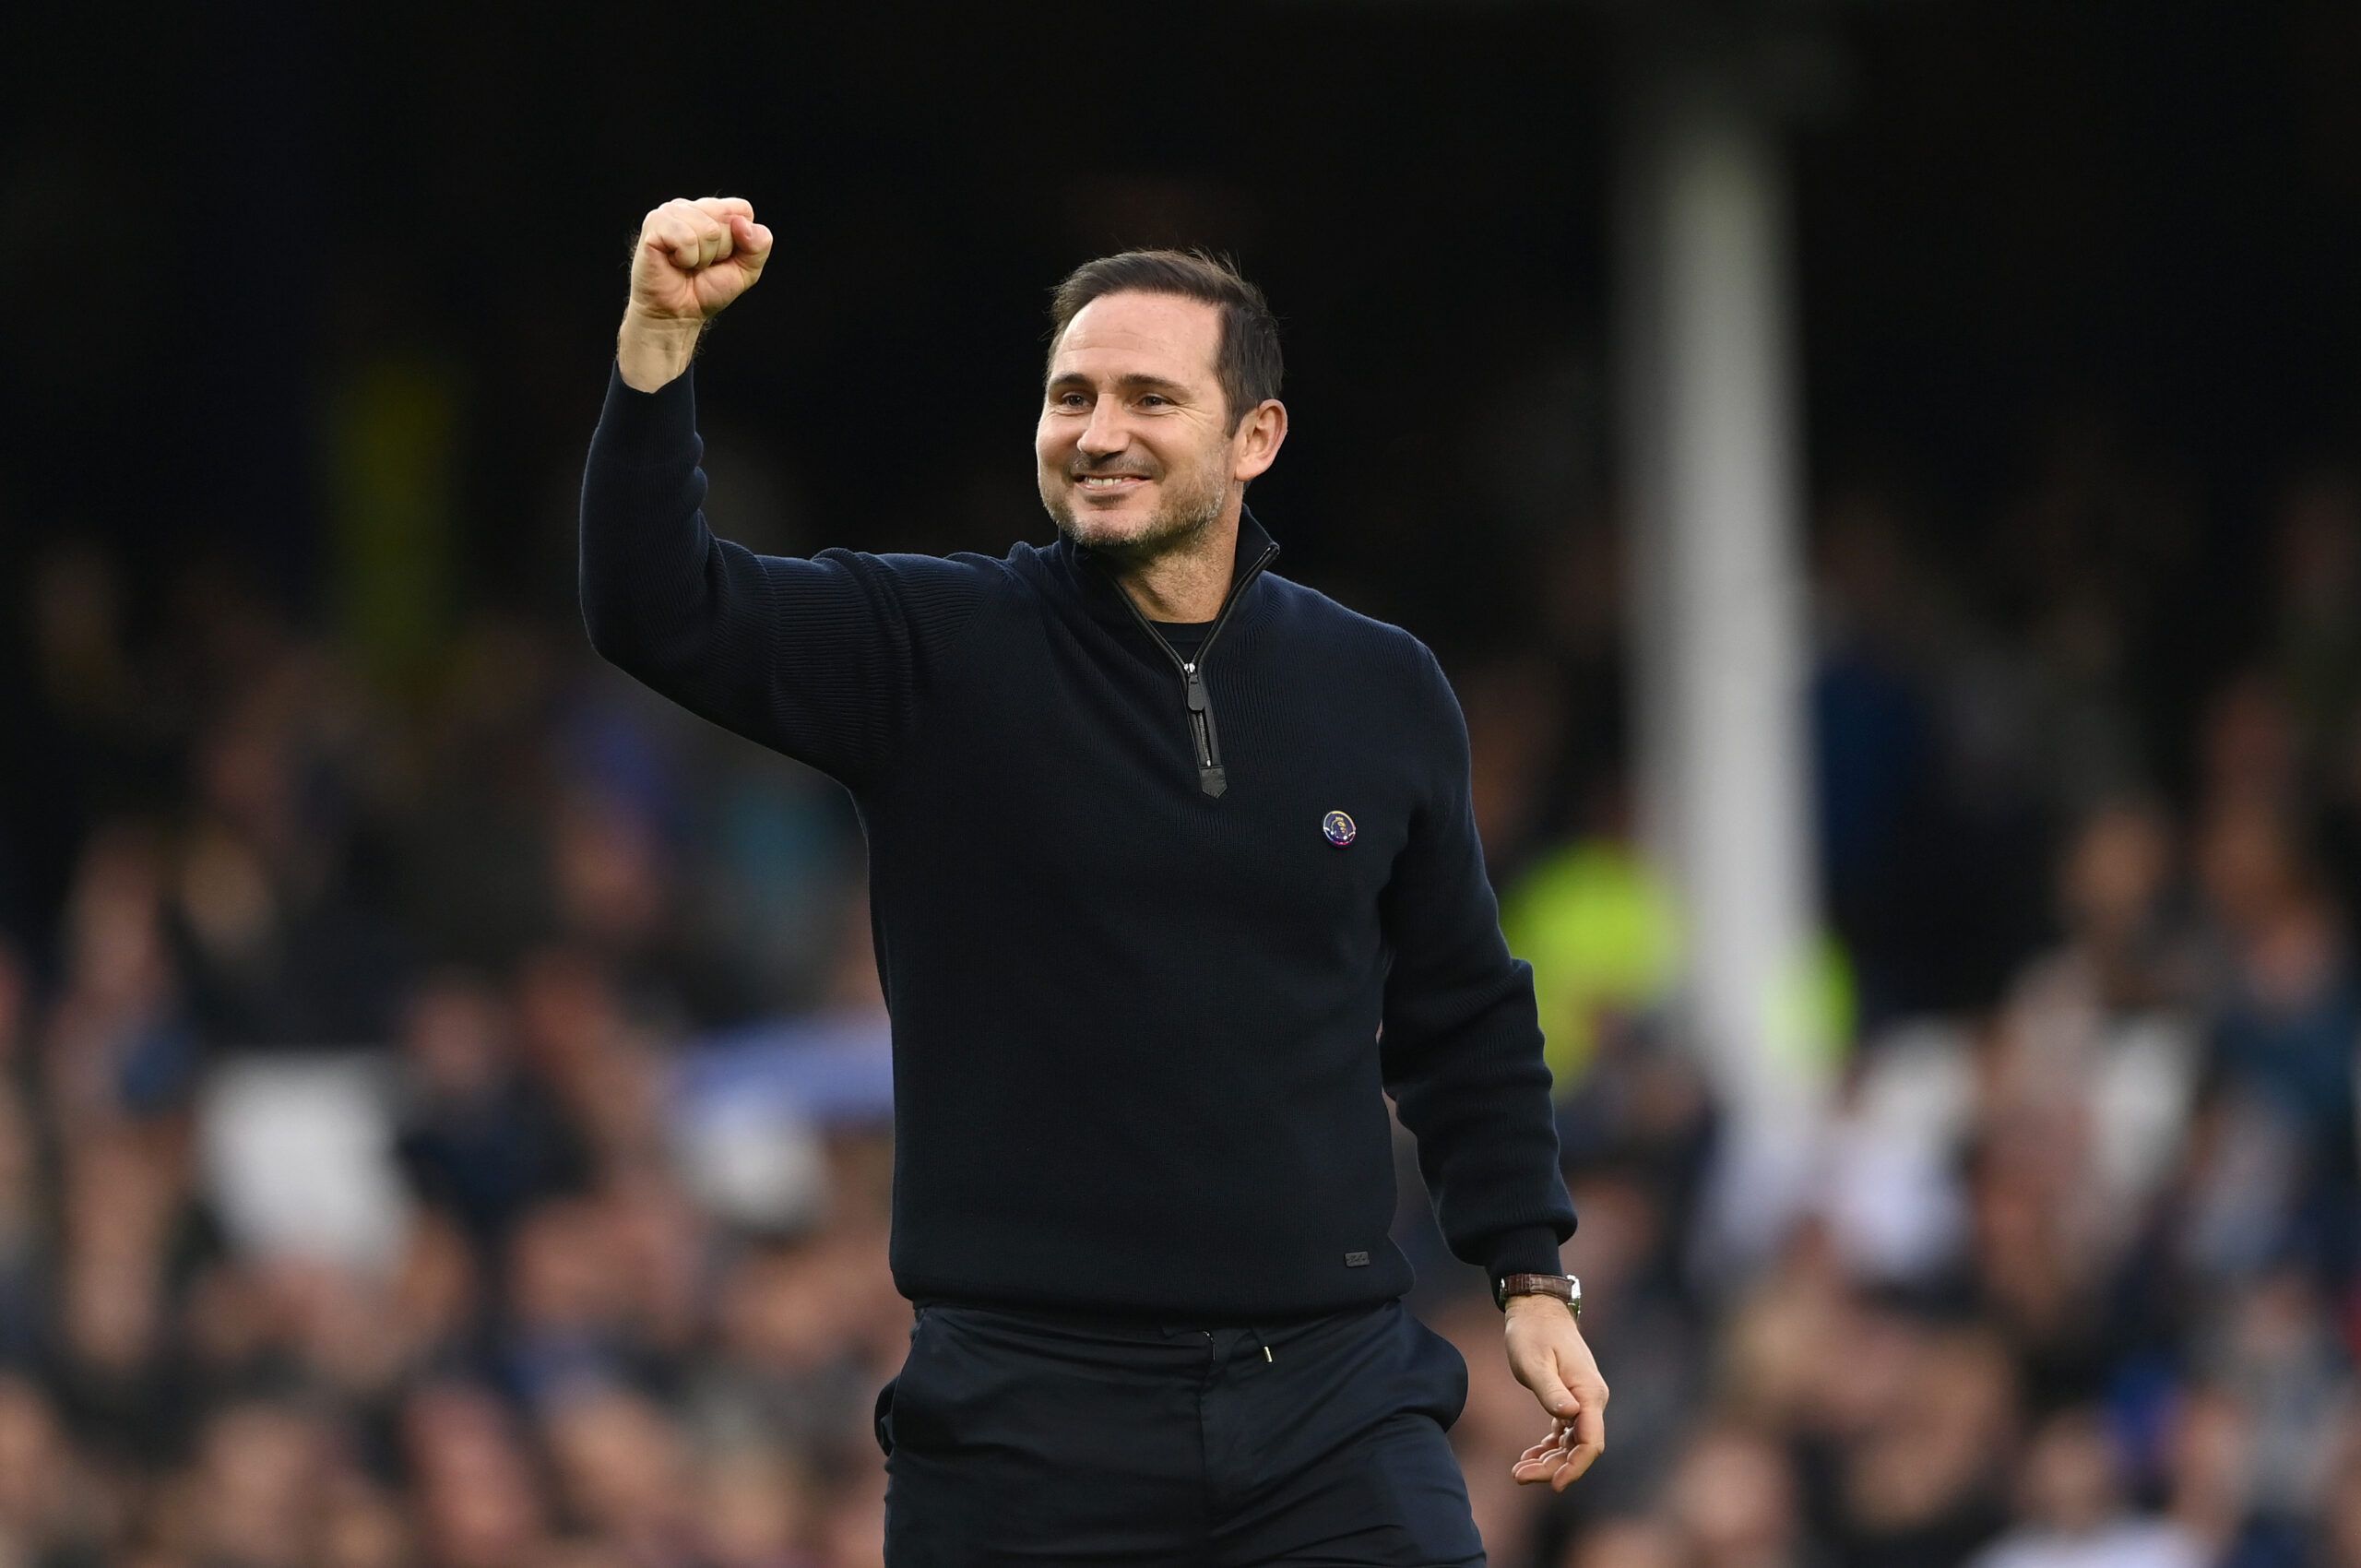 Everton manager Frank Lampard celebrates victory after the Premier League match